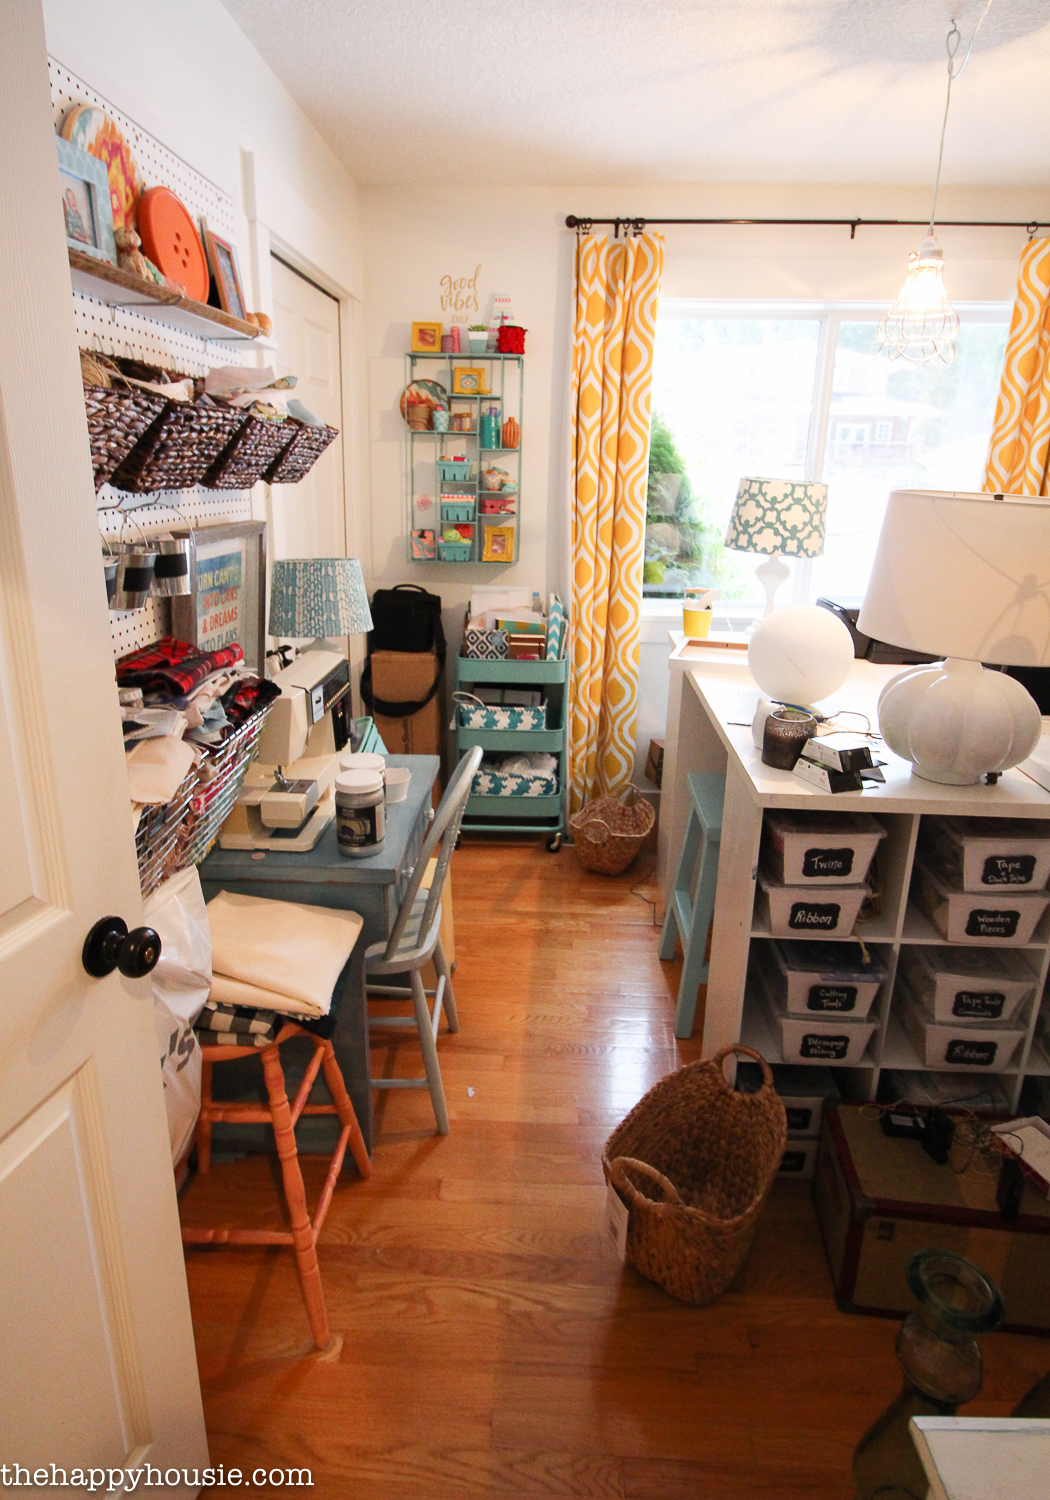 How To Organize A Craft Room Work Space The Happy Housie